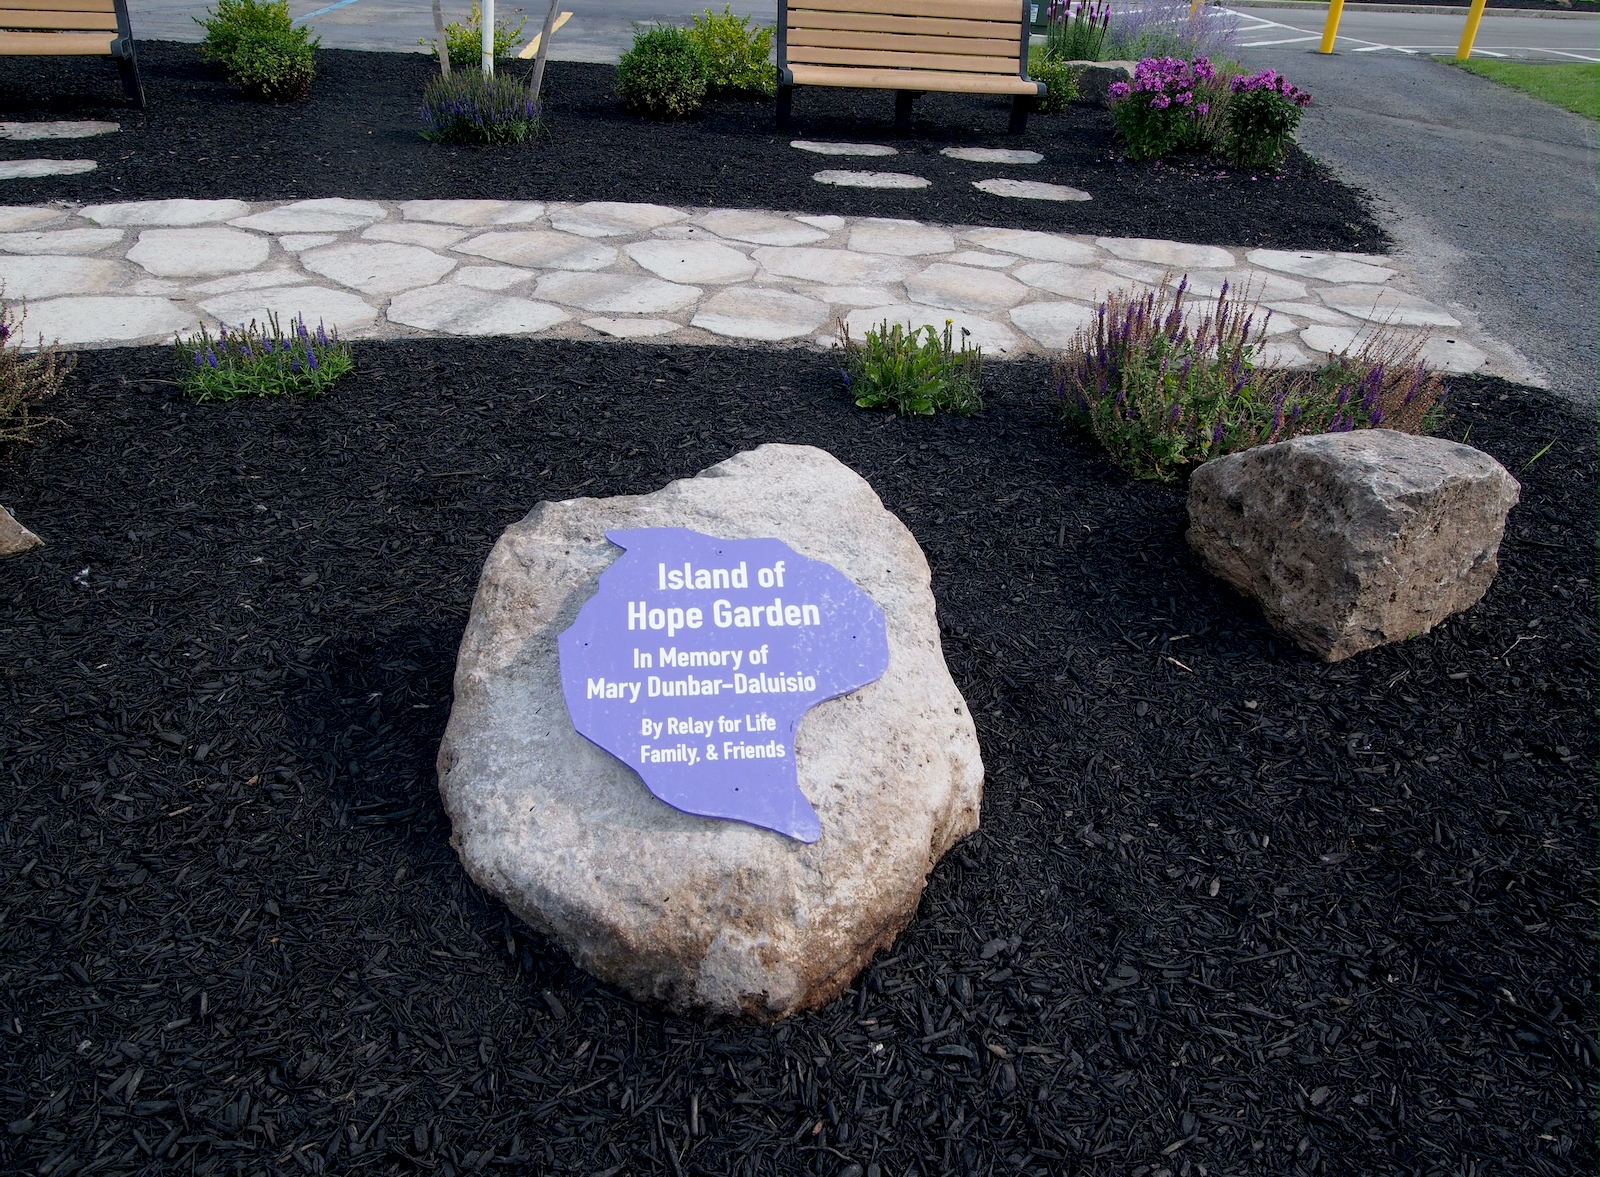 Relay For Life: The Garden of Hope is located near the concession stand at Veterans Park. A plaque honors the memory of Mary-Dunbar-Daluisio, longtime co-chair of Grand Island's cancer awareness event.